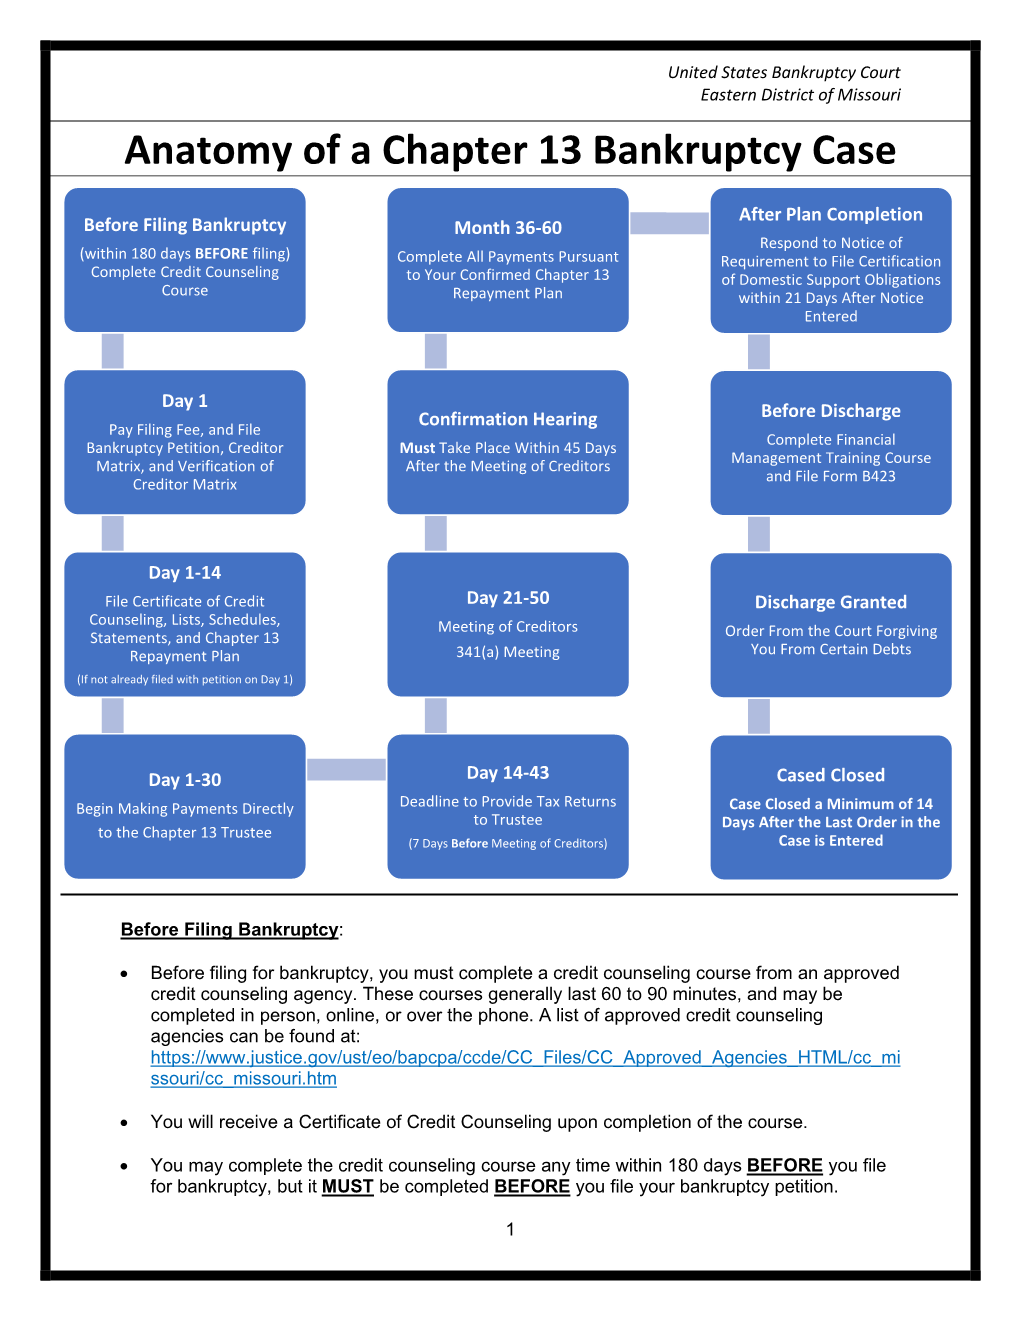 Anatomy of a Chapter 13 Bankruptcy Case